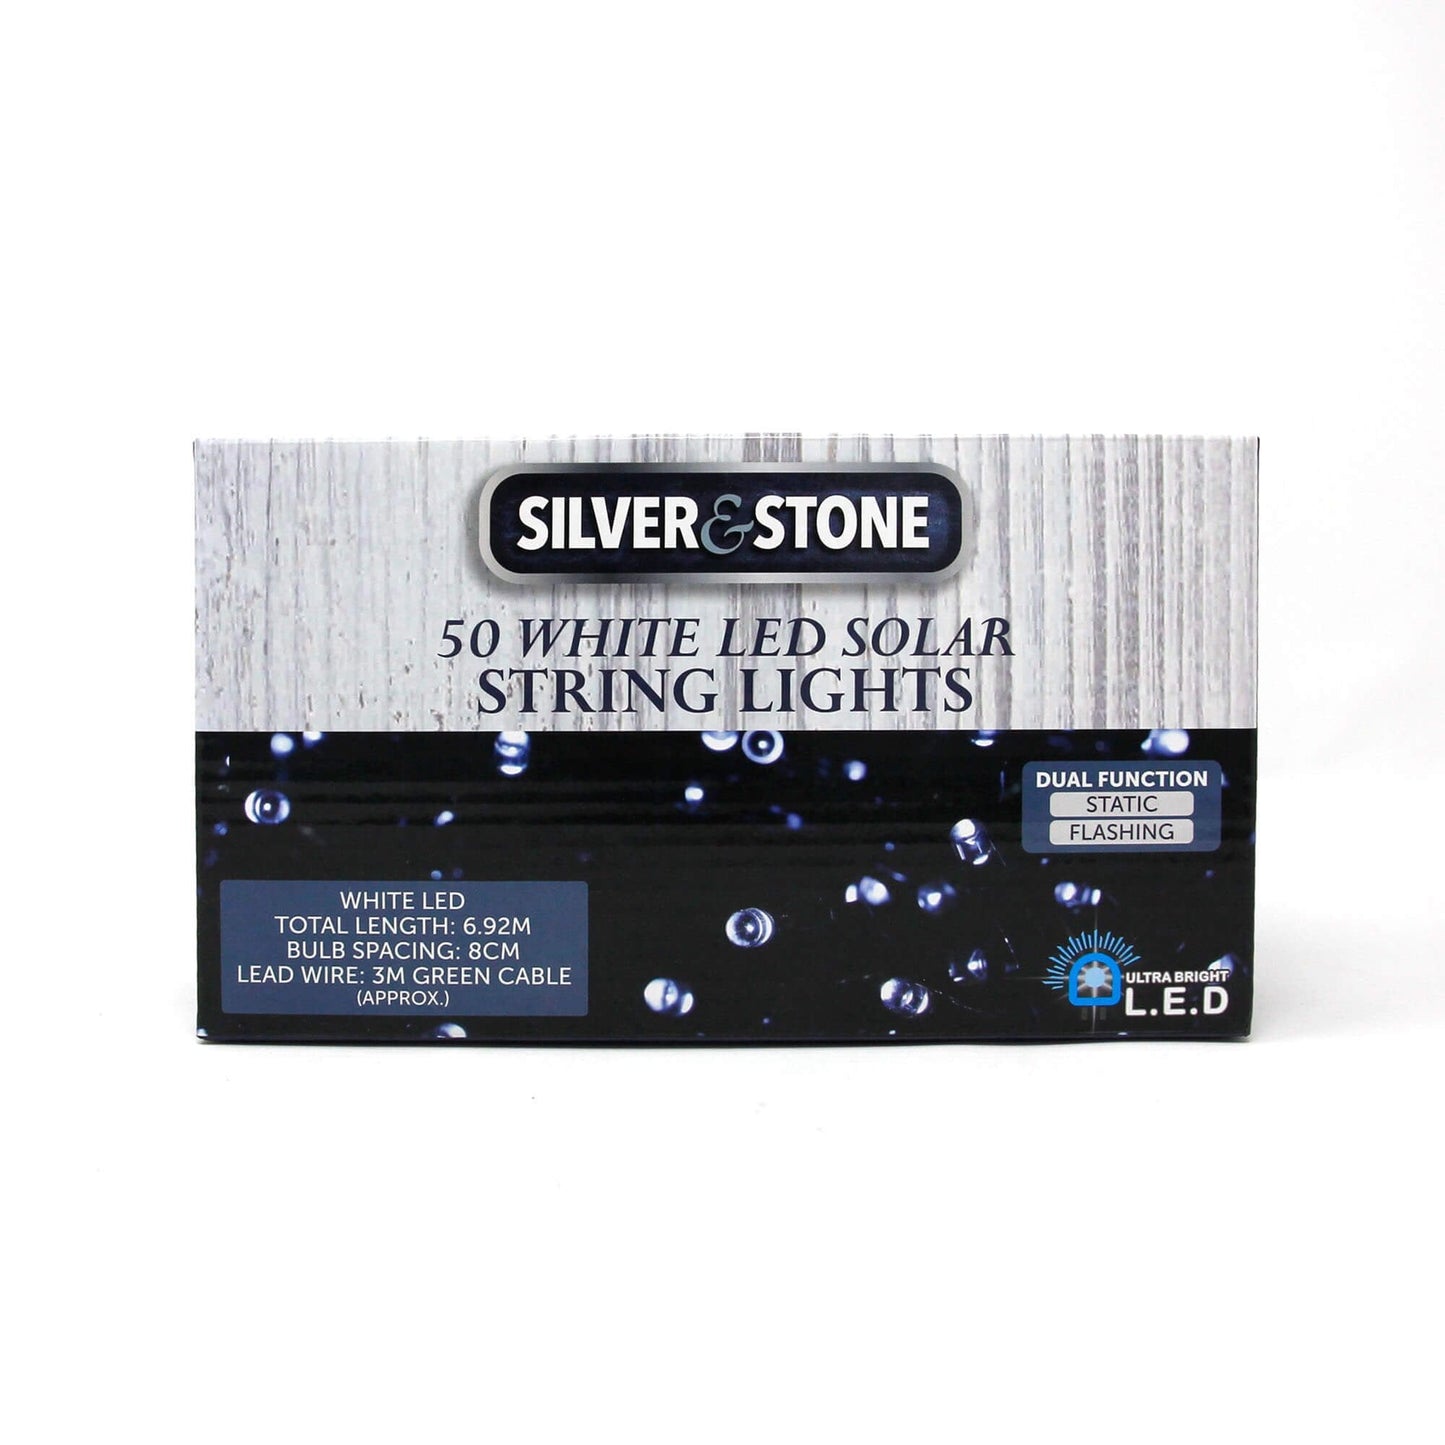 Silver & Stone Solar Powered String Lights with 50 White LEDs